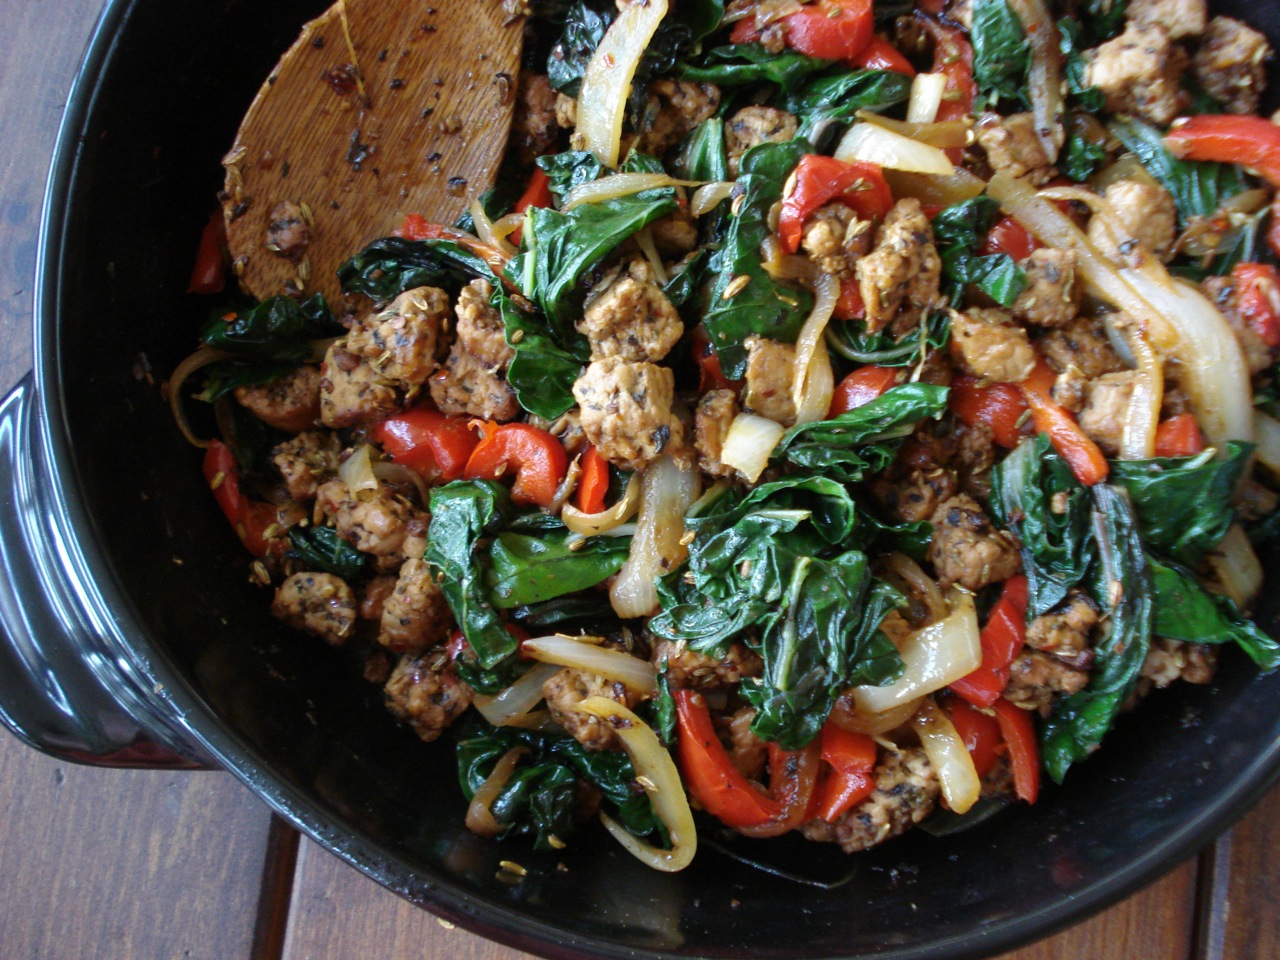 Sausage (Tempeh) & Peppers w/ Greens